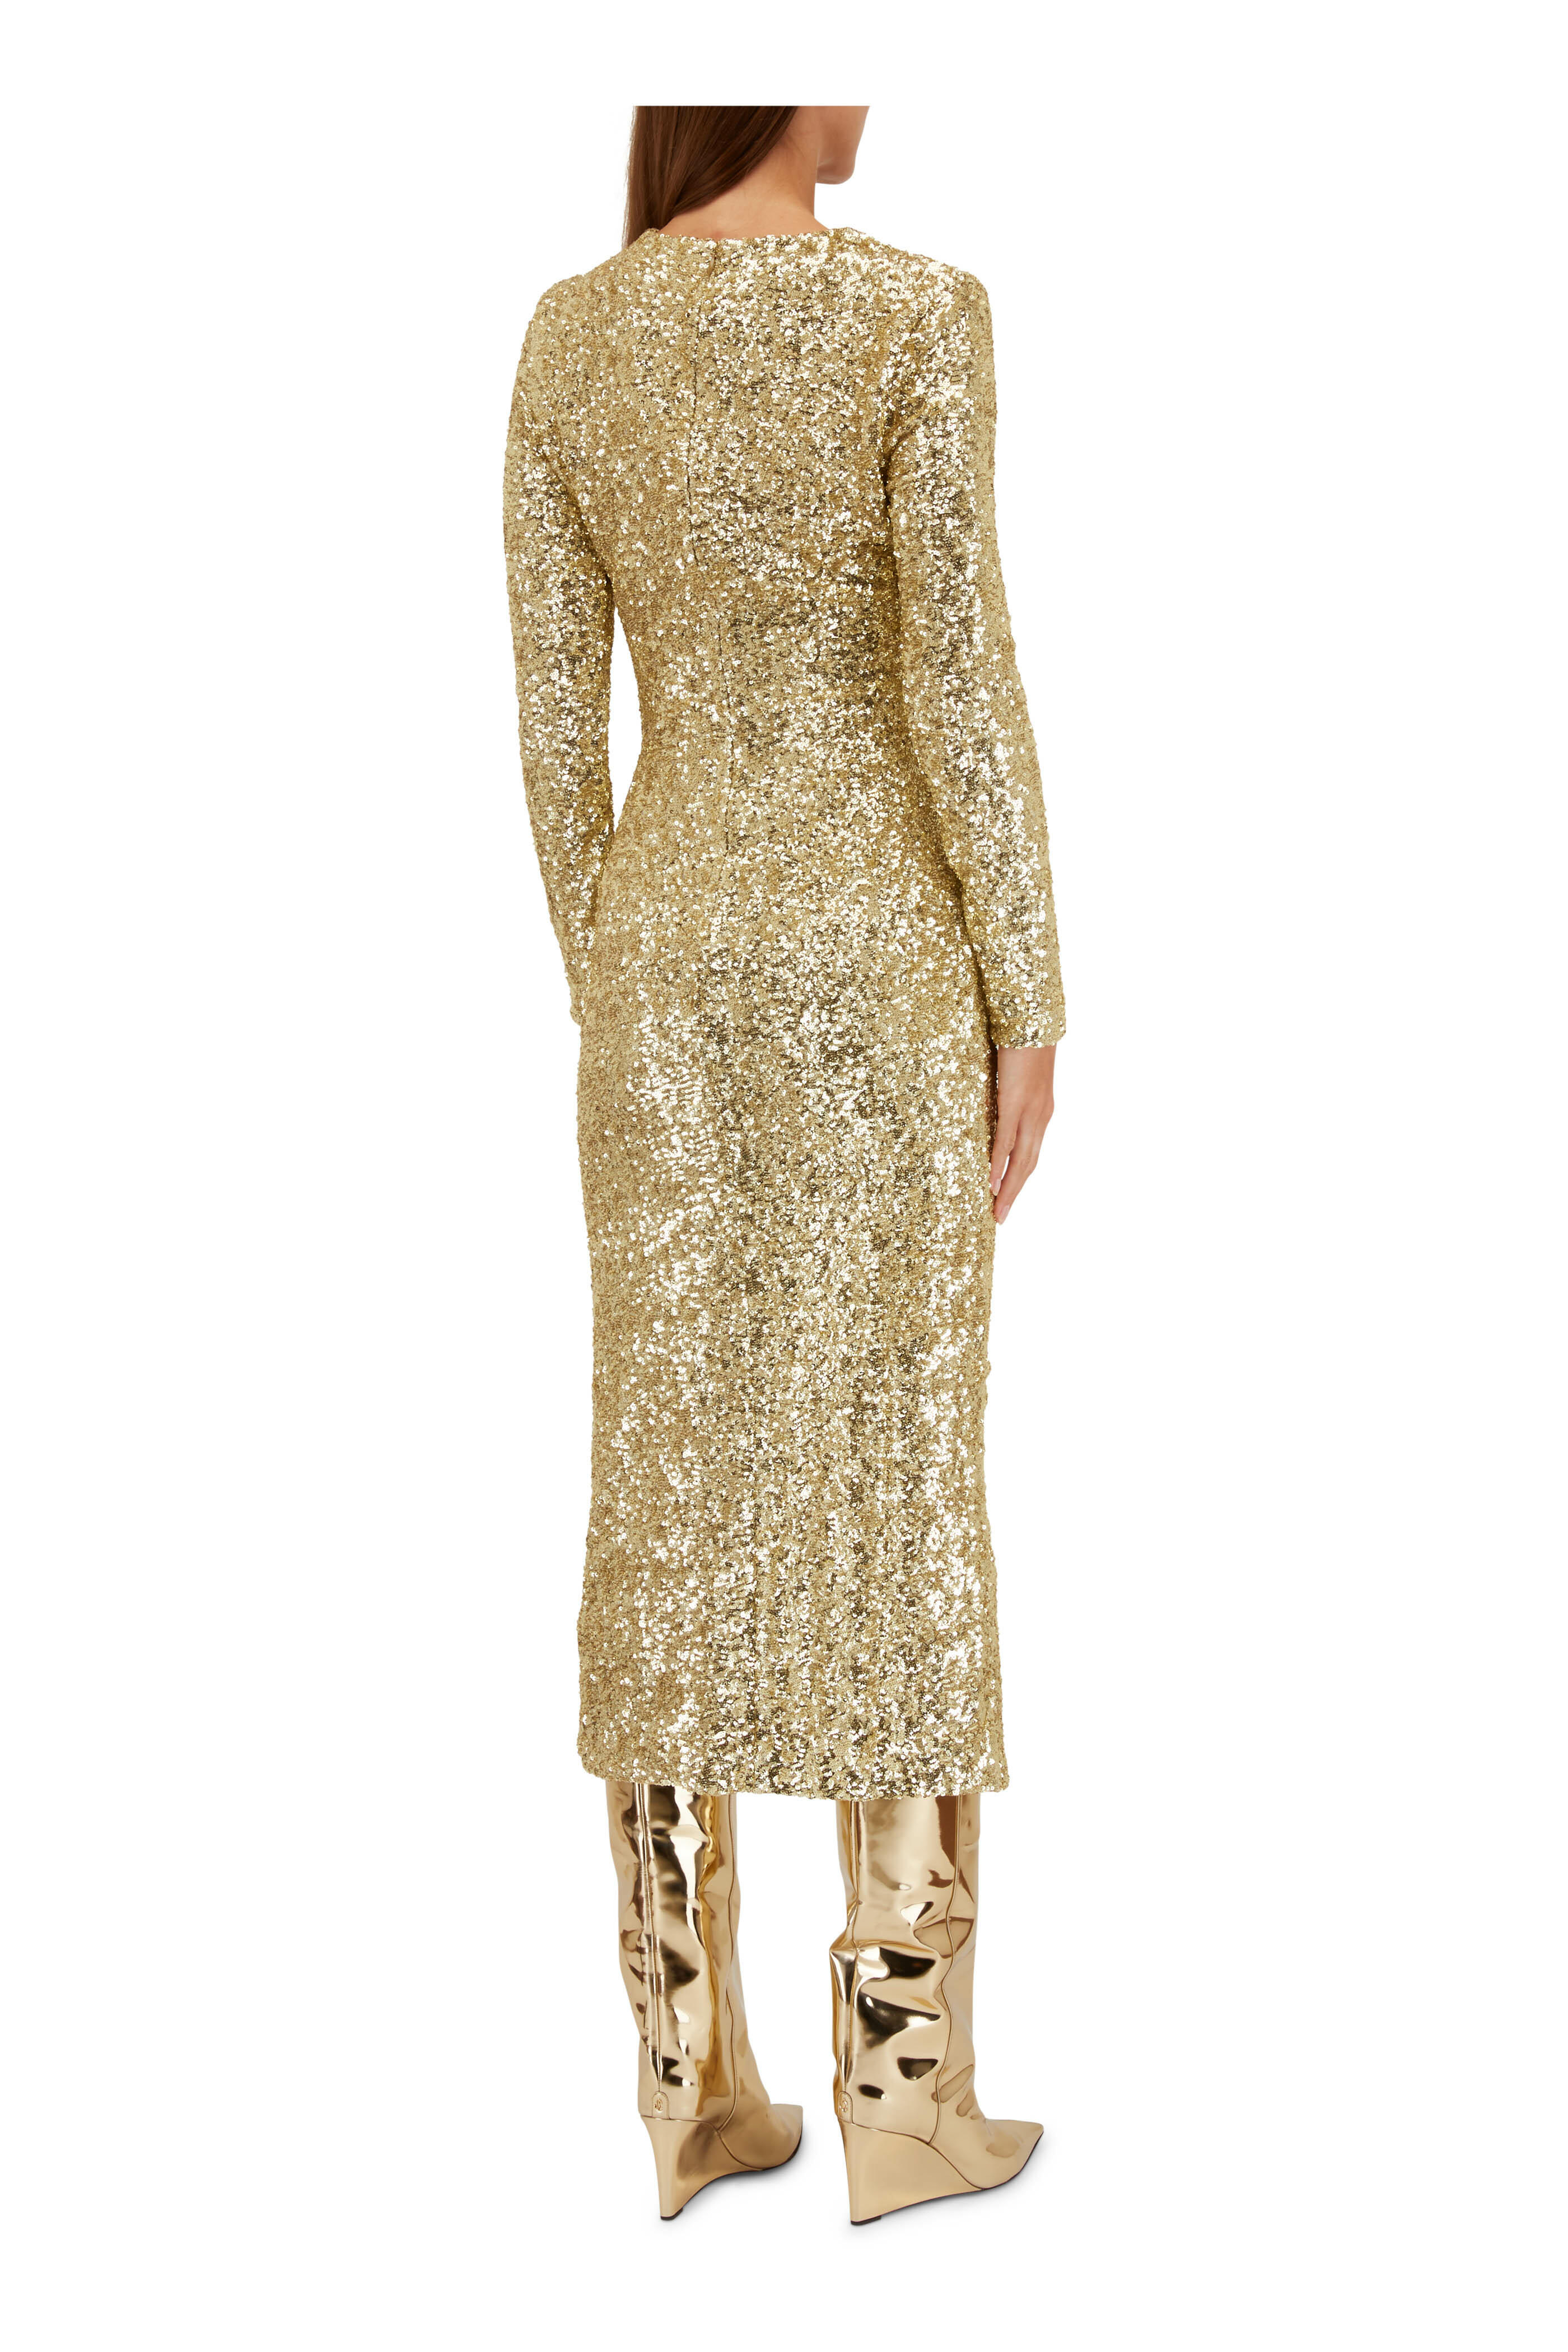 Michael Kors Collection - Gold Draped Sequin Dress